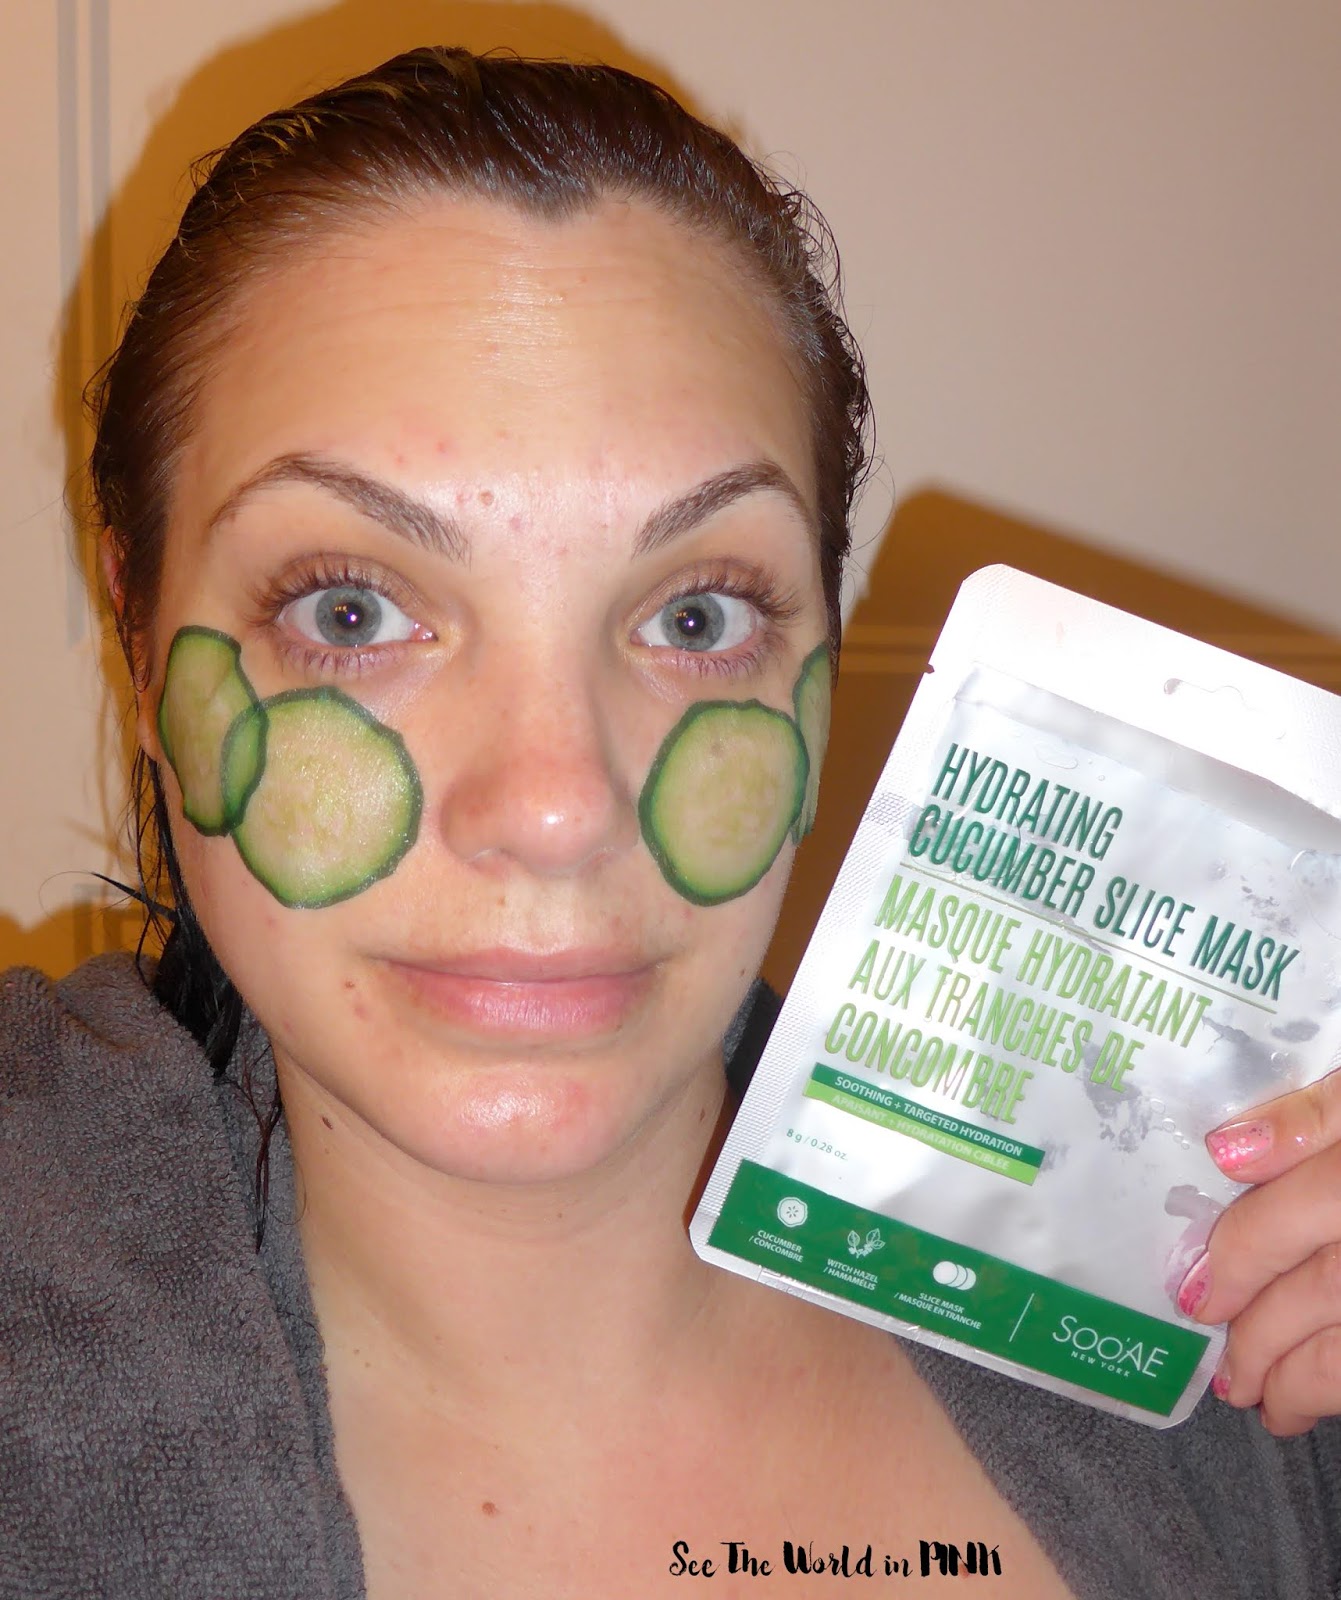 Skincare Sunday Week of Affordable K-Beauty Masks You Can Find at Walmart - SooAE Masks and iN.gredients